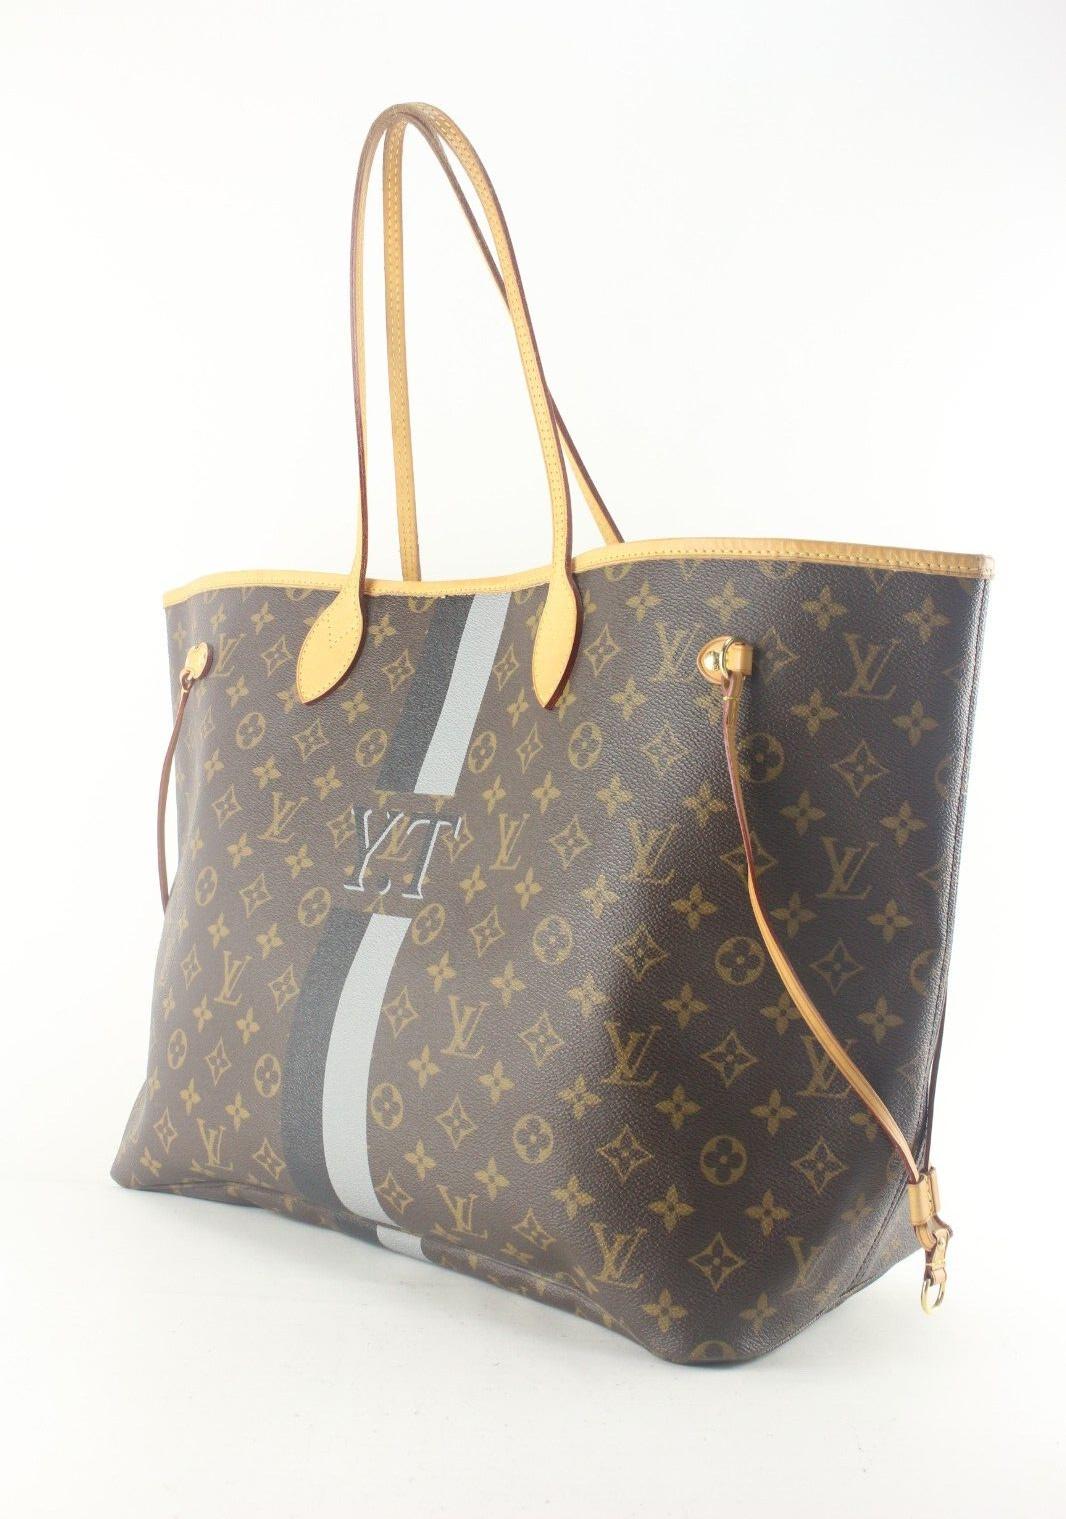 Removing gold initials heat stamp from a Louis Vuitton Neverfull 